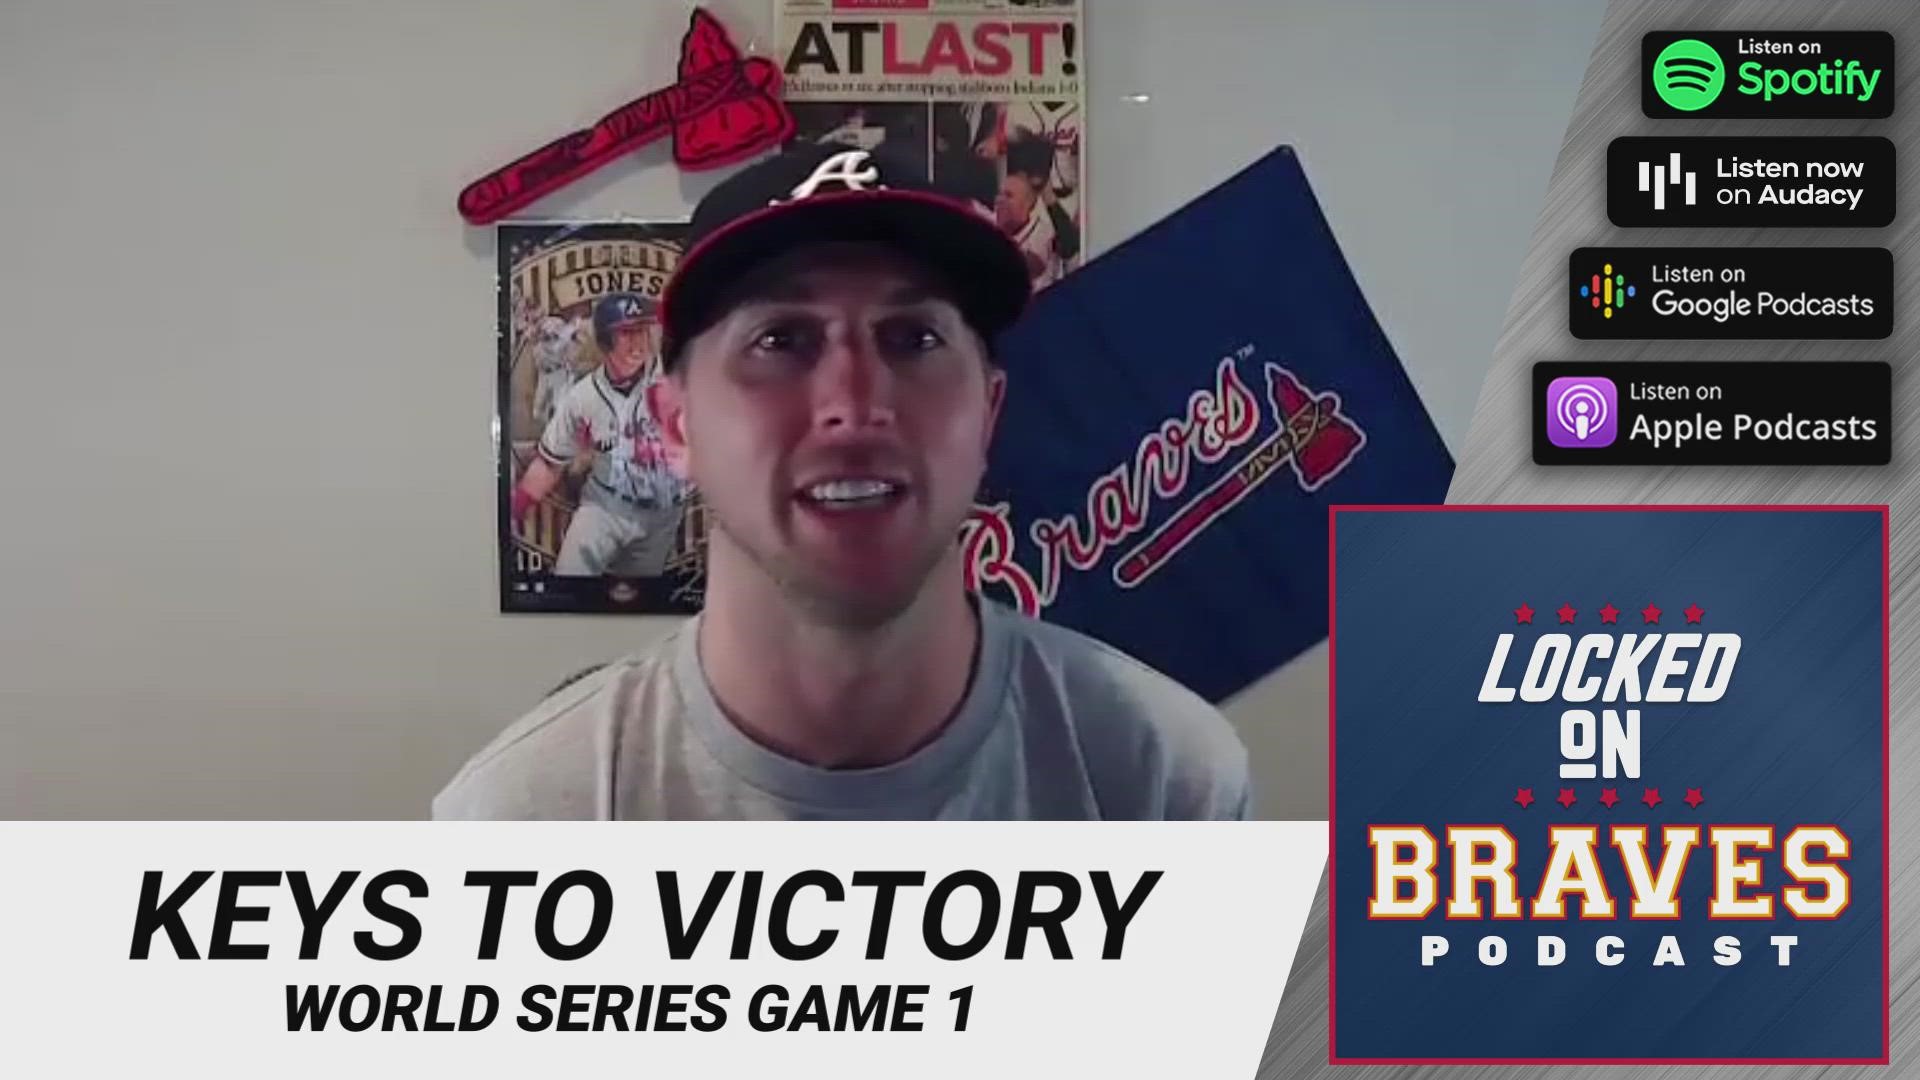 Braves vs. Astros World Series: 5 Things to Know - The New York Times